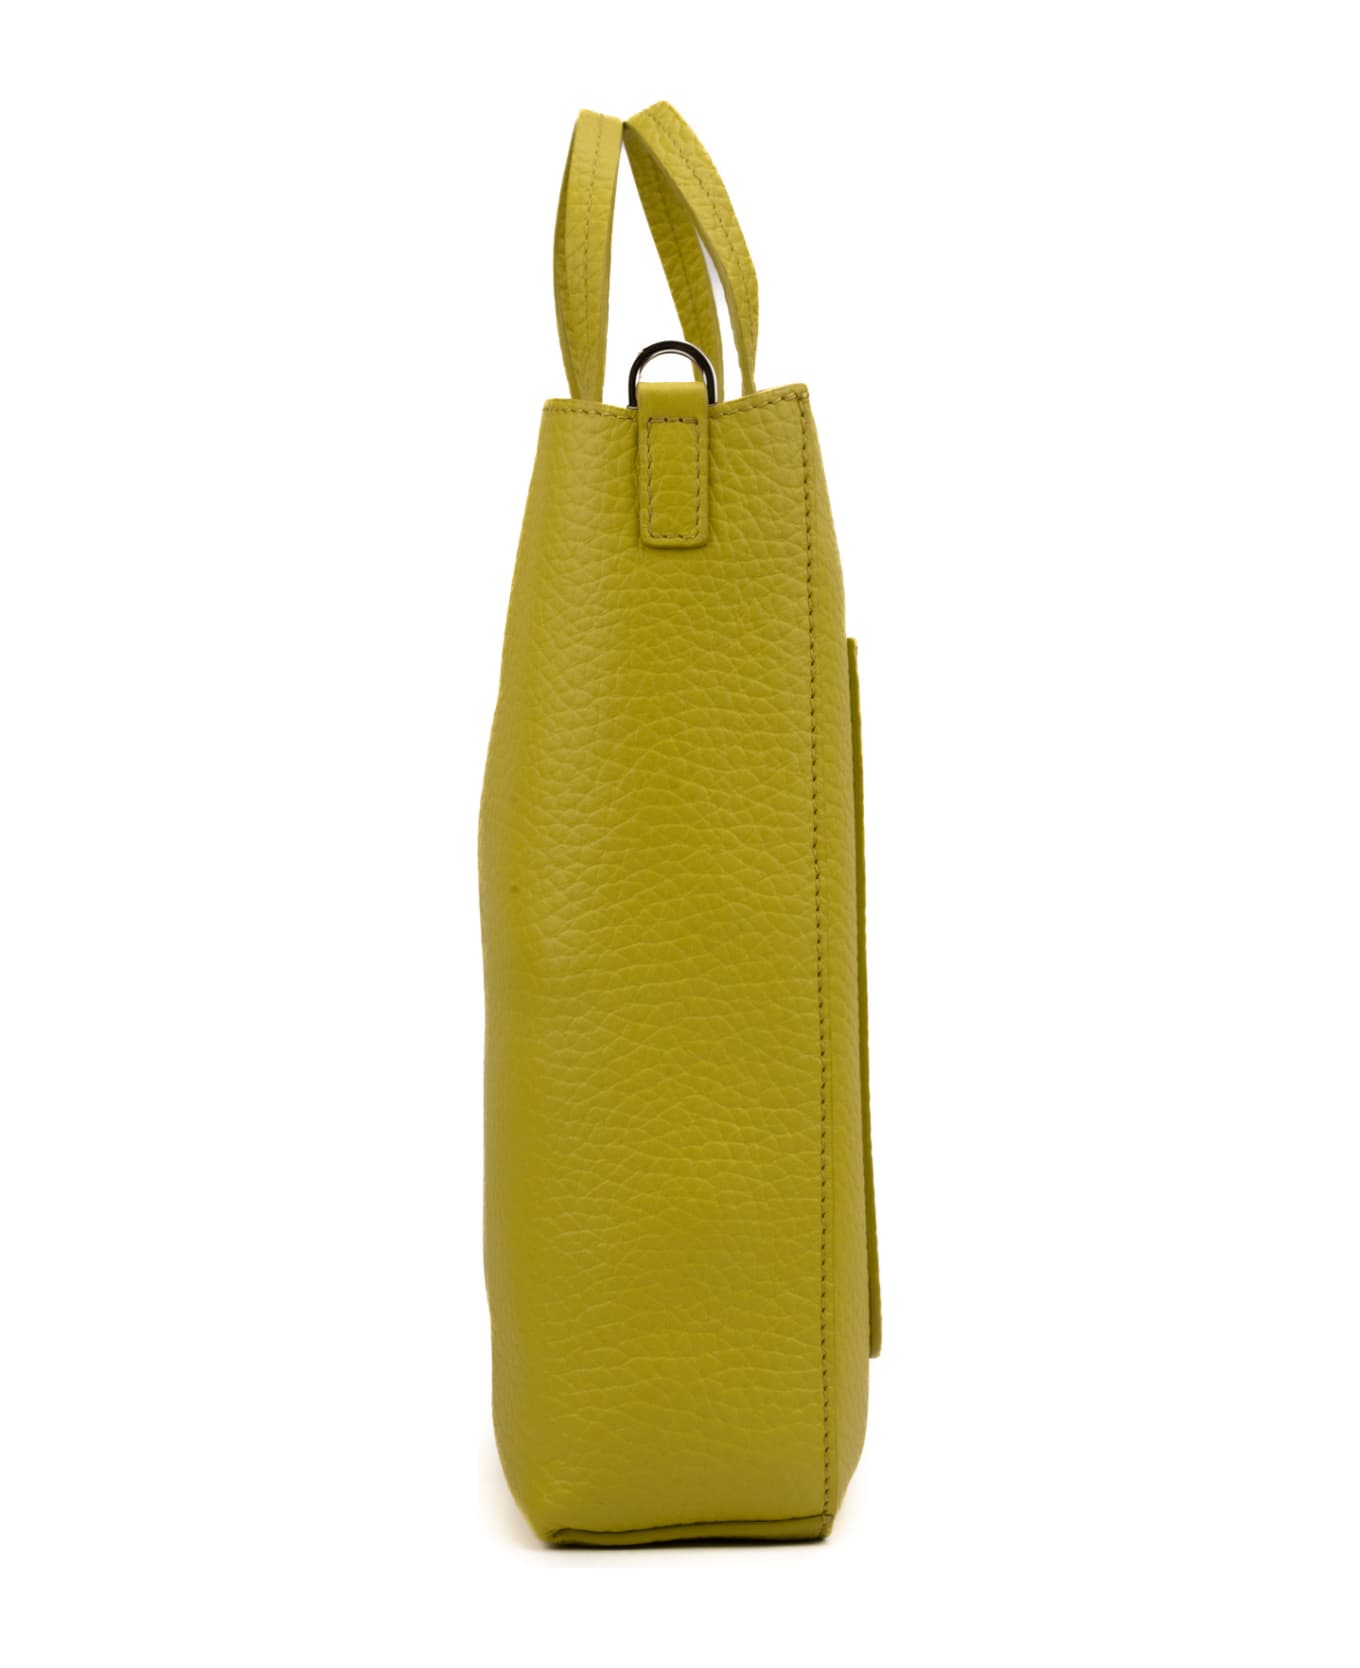 Orciani Ladylike S Soft Shopper In Yellow Leather - Giallo